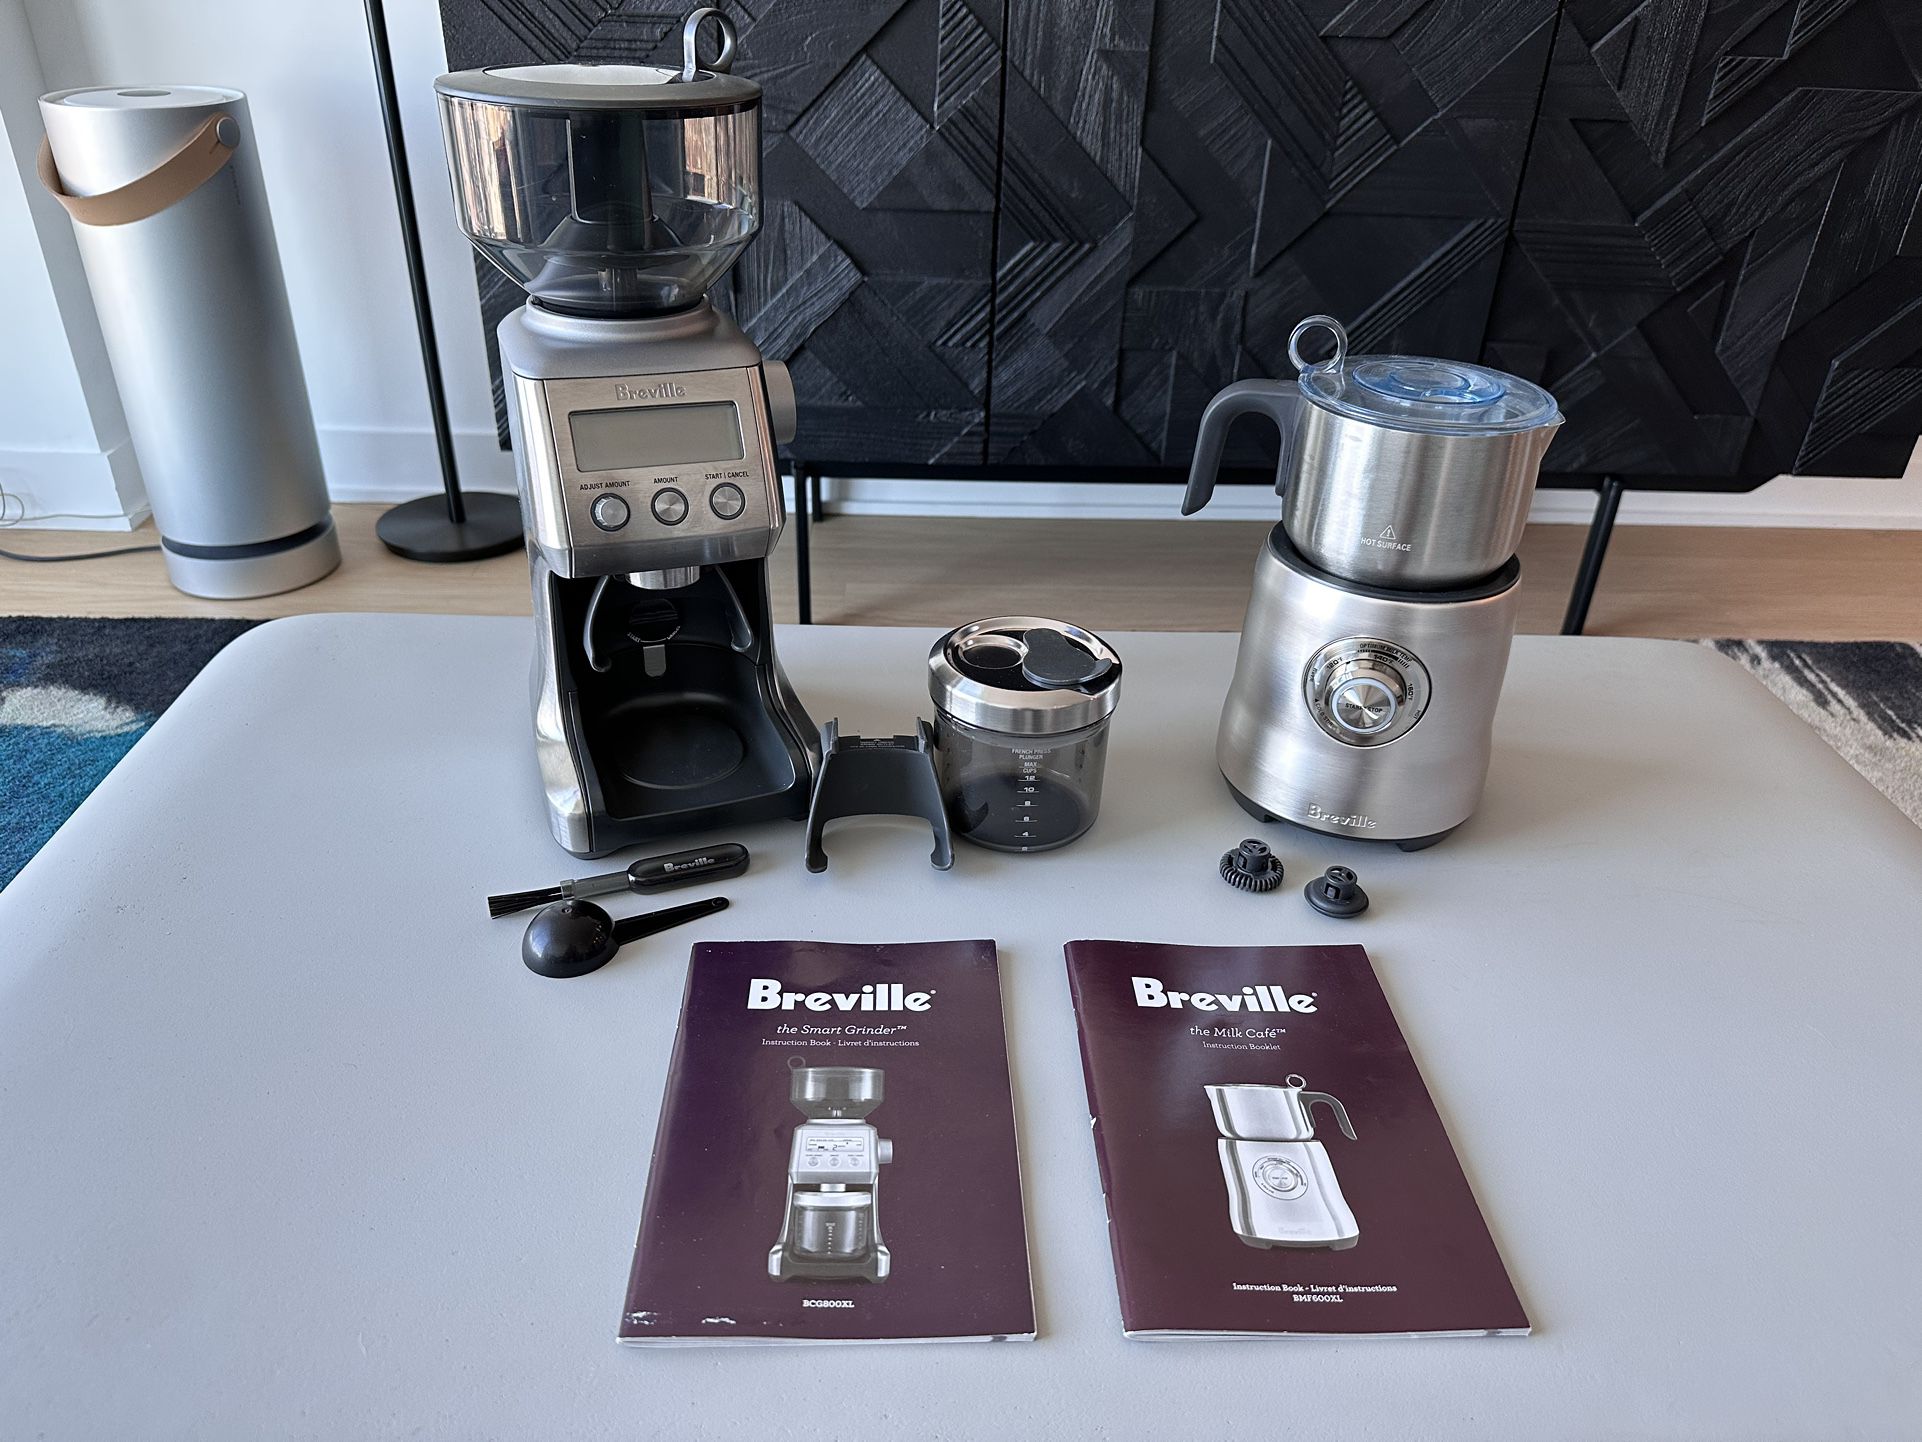 Breville Grinder & Frother Combo for Sale in Brooklyn, NY - OfferUp